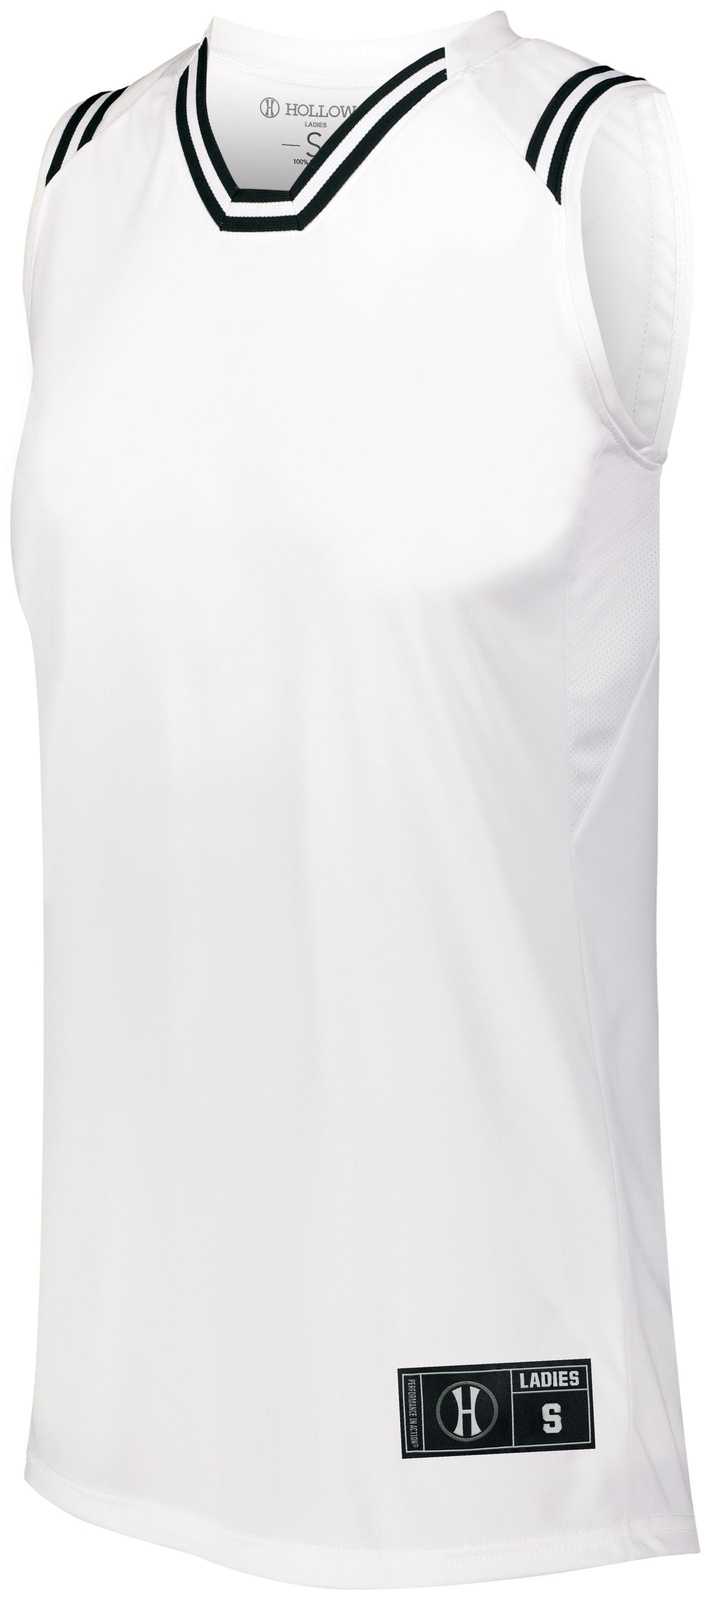 Holloway 224376 Ladies Retro Basketball Jersey - White Black - HIT a Double